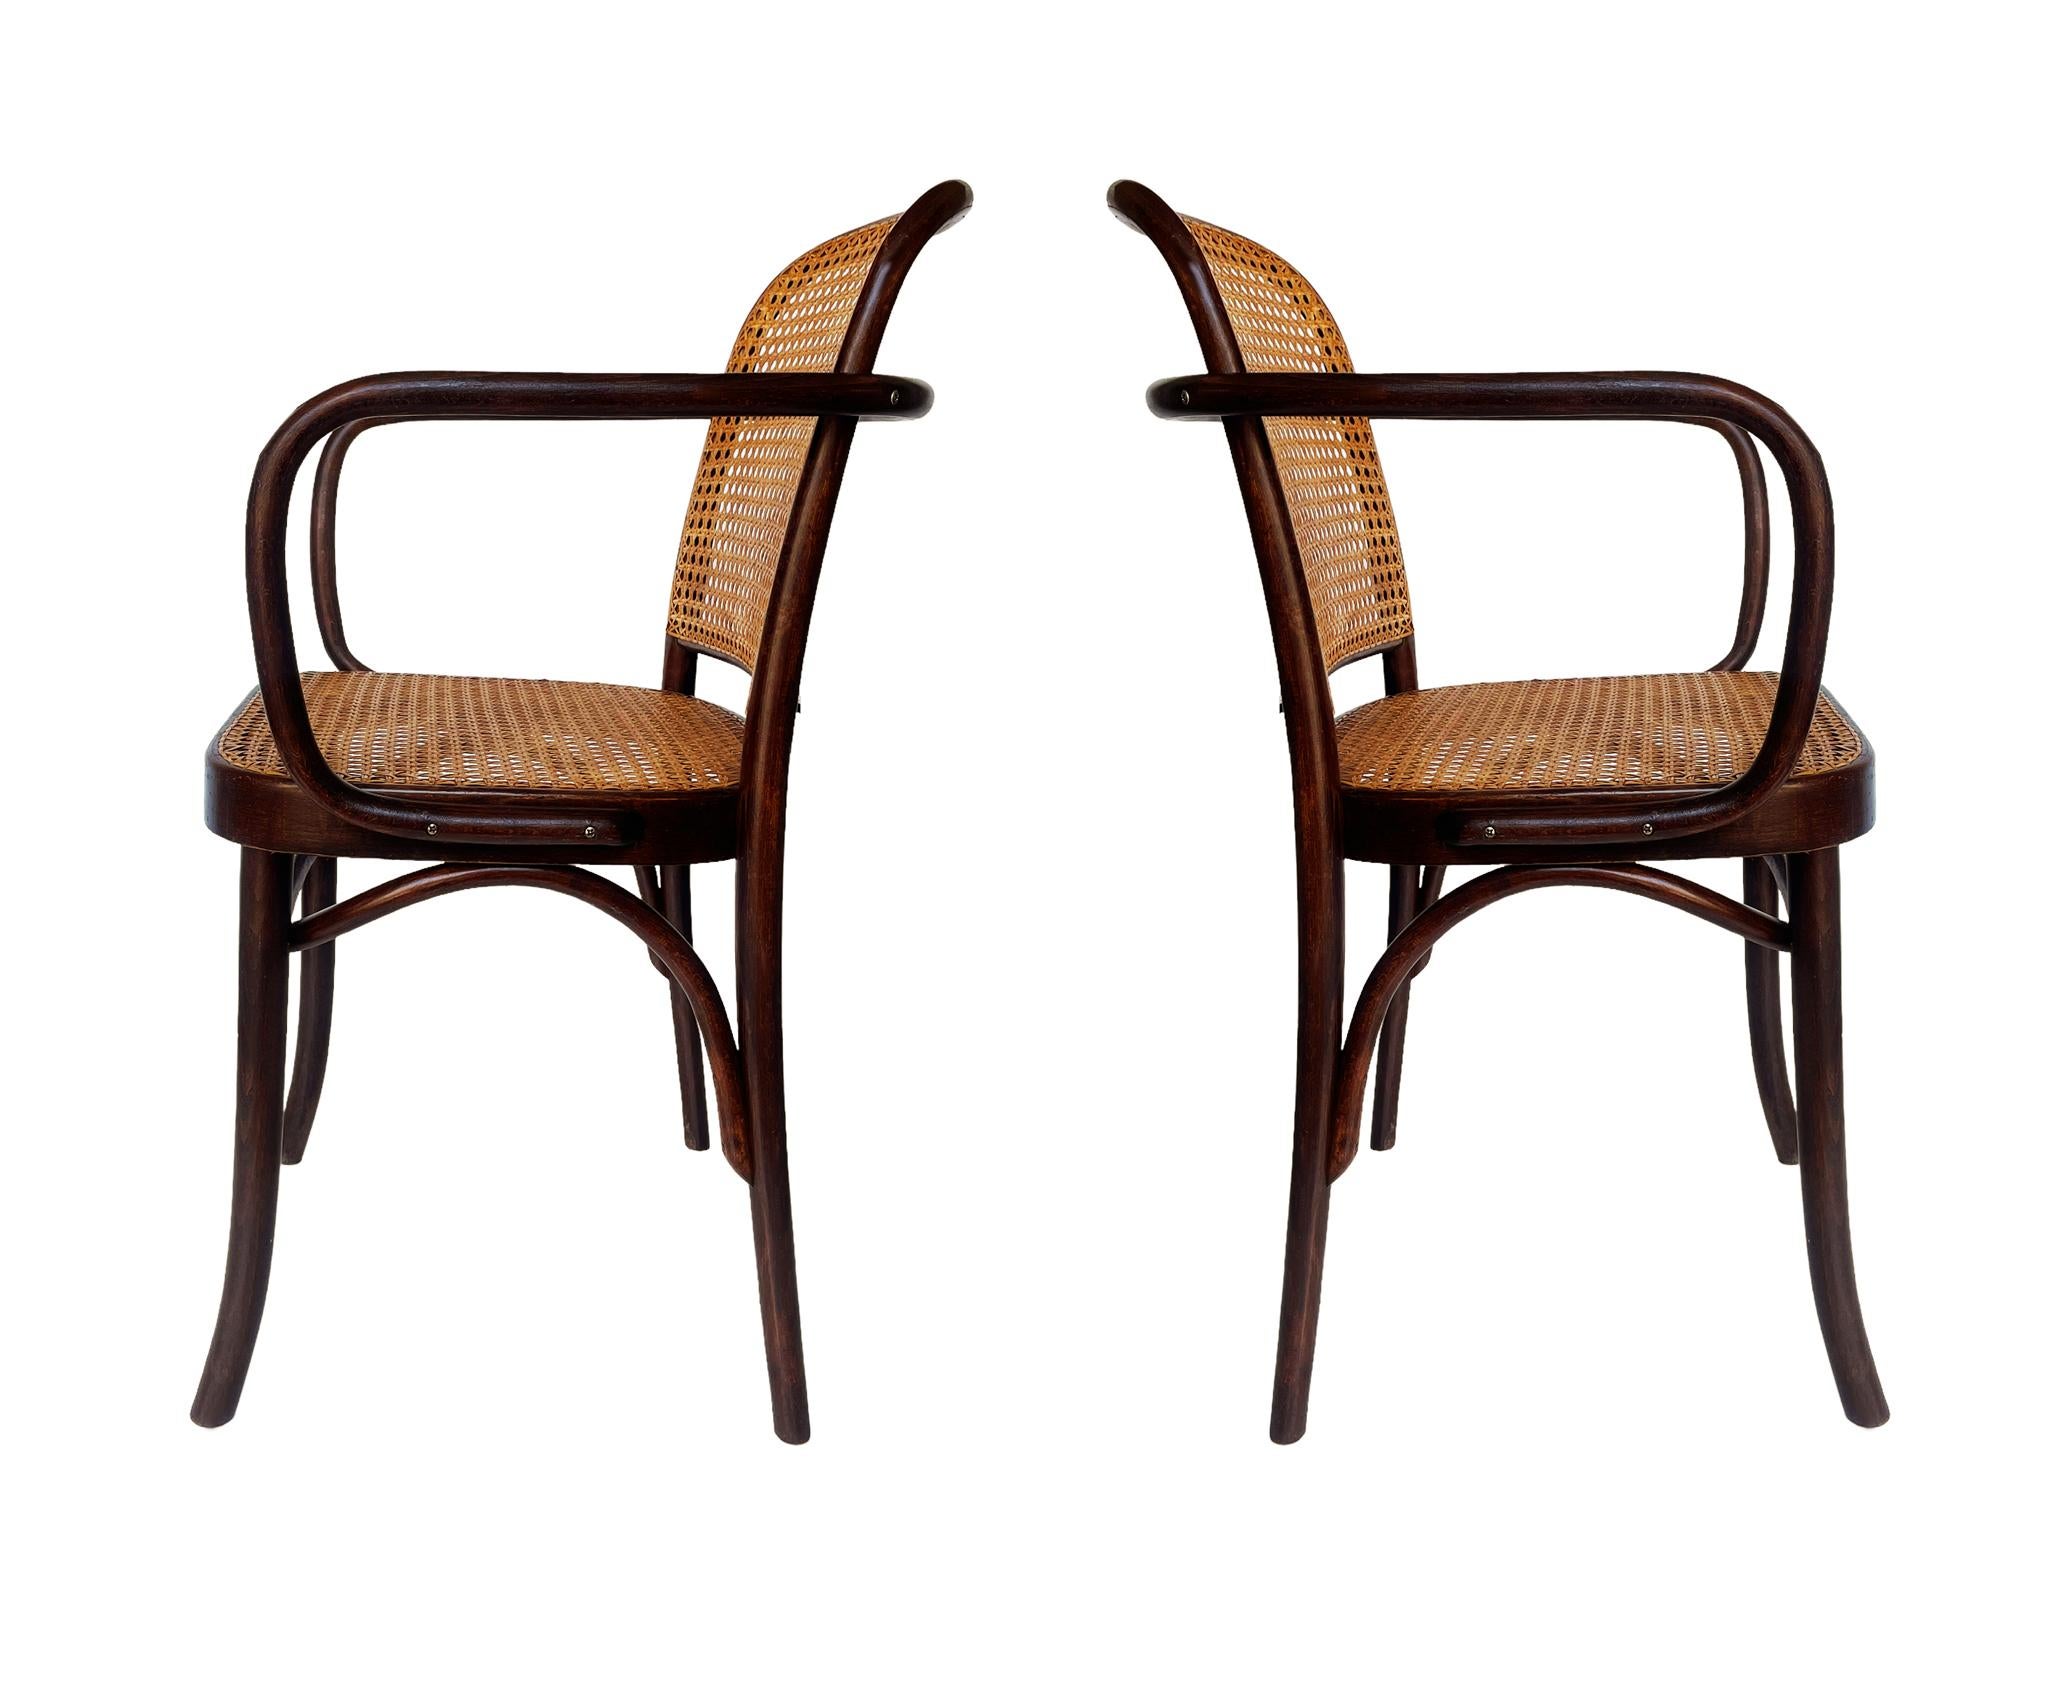 Set of 4 Mid-Century Modern Dining Prague Chairs by Josef Hoffmann Cane & Wood For Sale 4